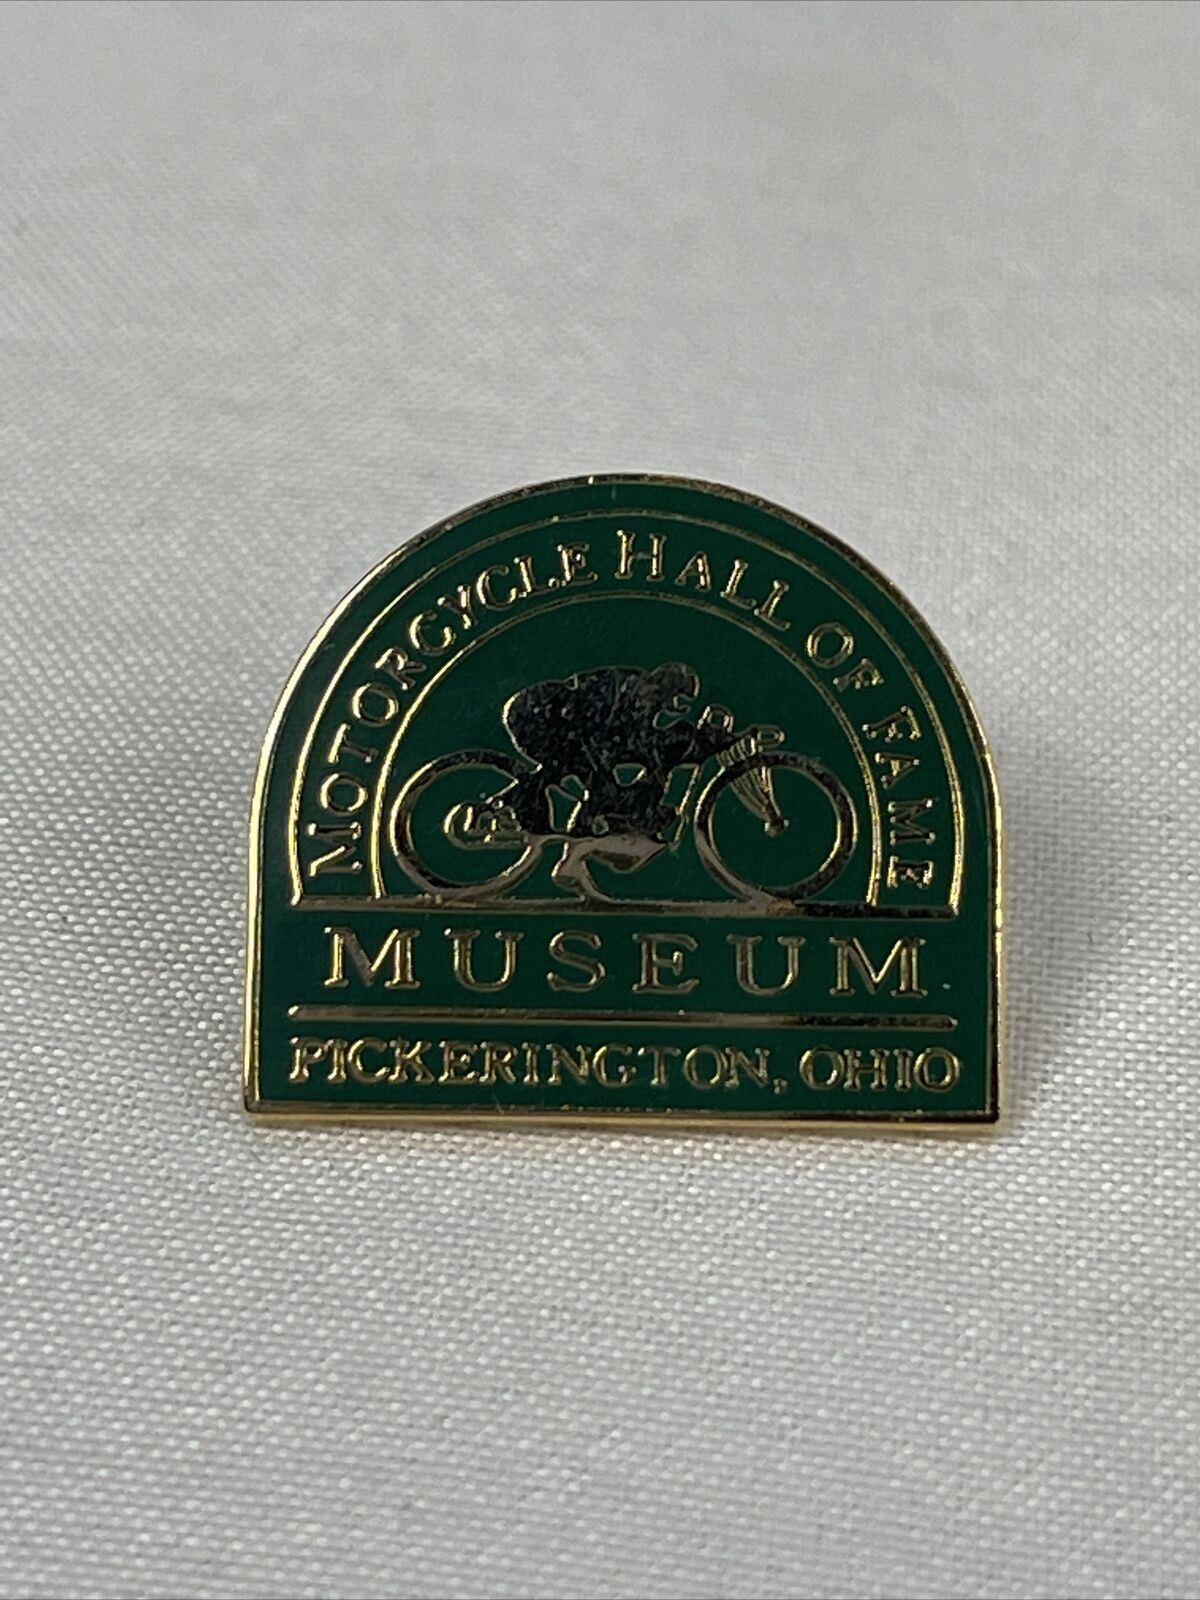 Motorcycle Hall of Fame Museum Supporter Vest Jacket Hat Lapel Pin Pickering, OH